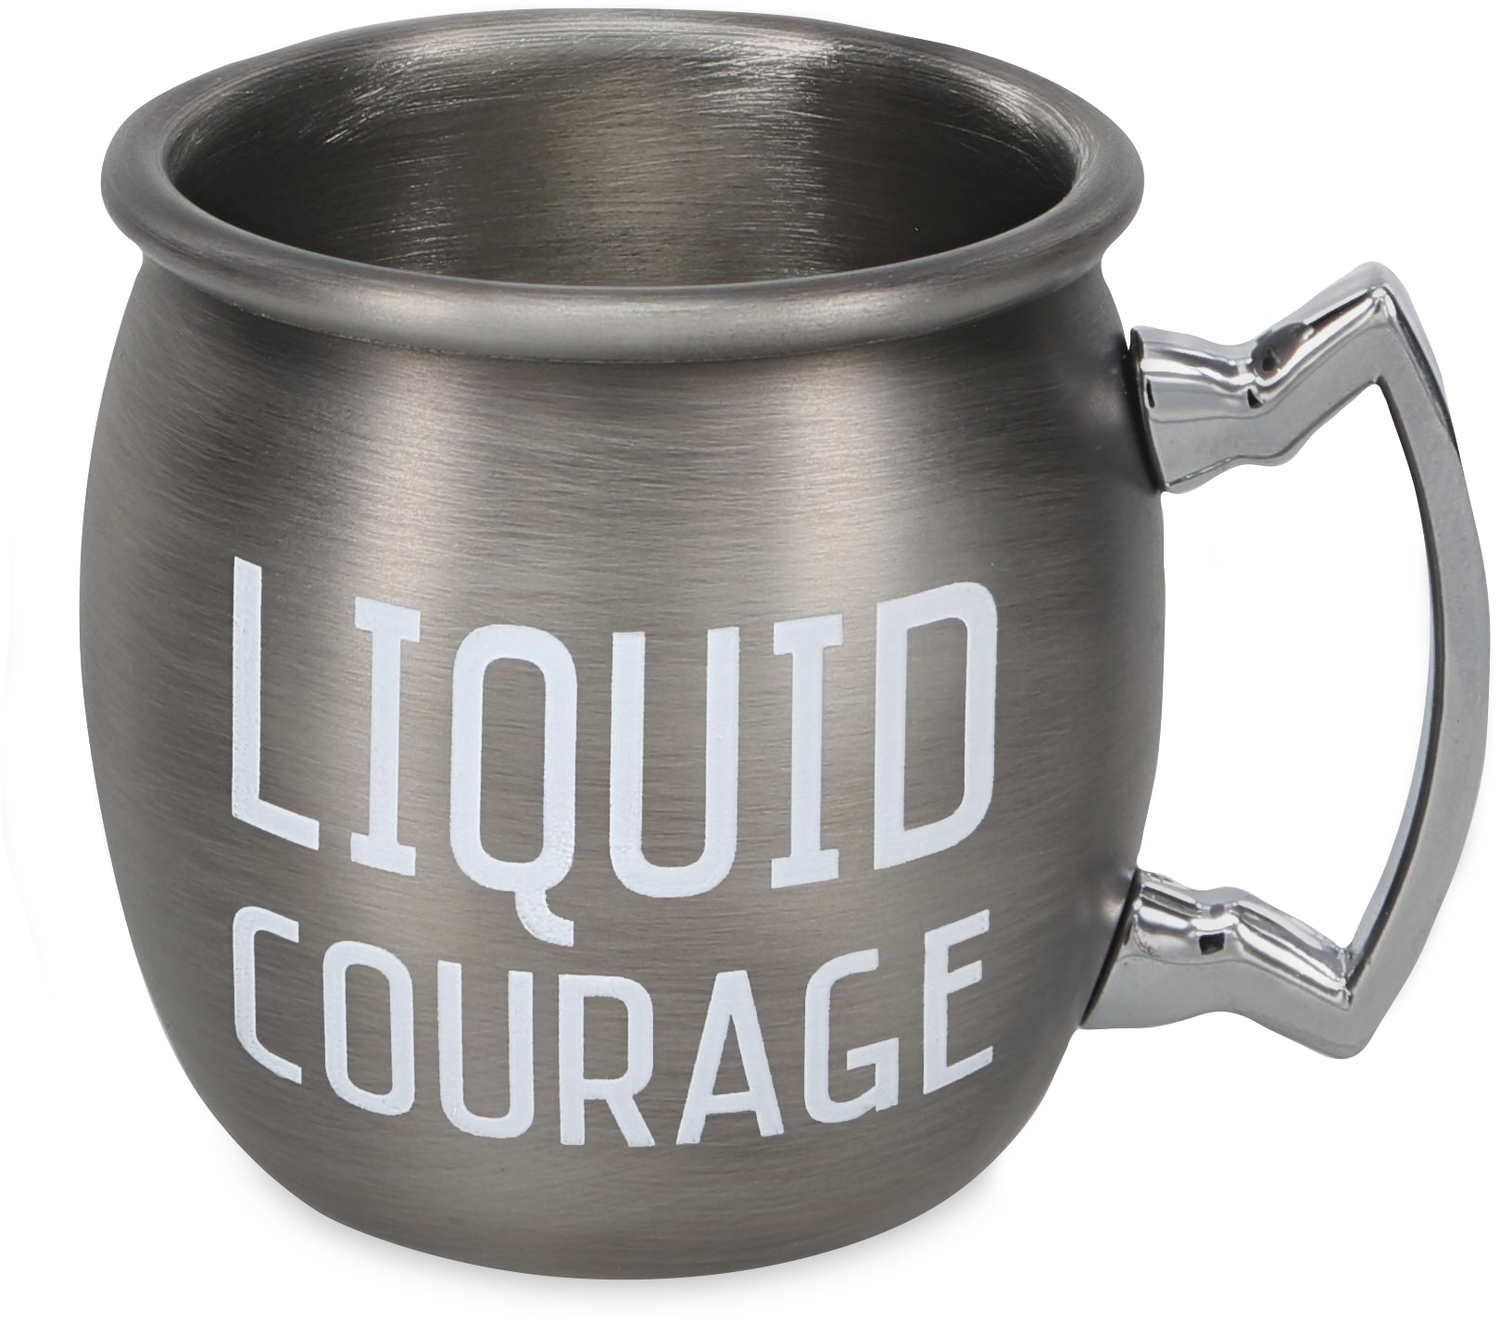 Liquid Courage by Man Crafted - Liquid Courage - 2 oz Stainless Steel Moscow Mule Shot